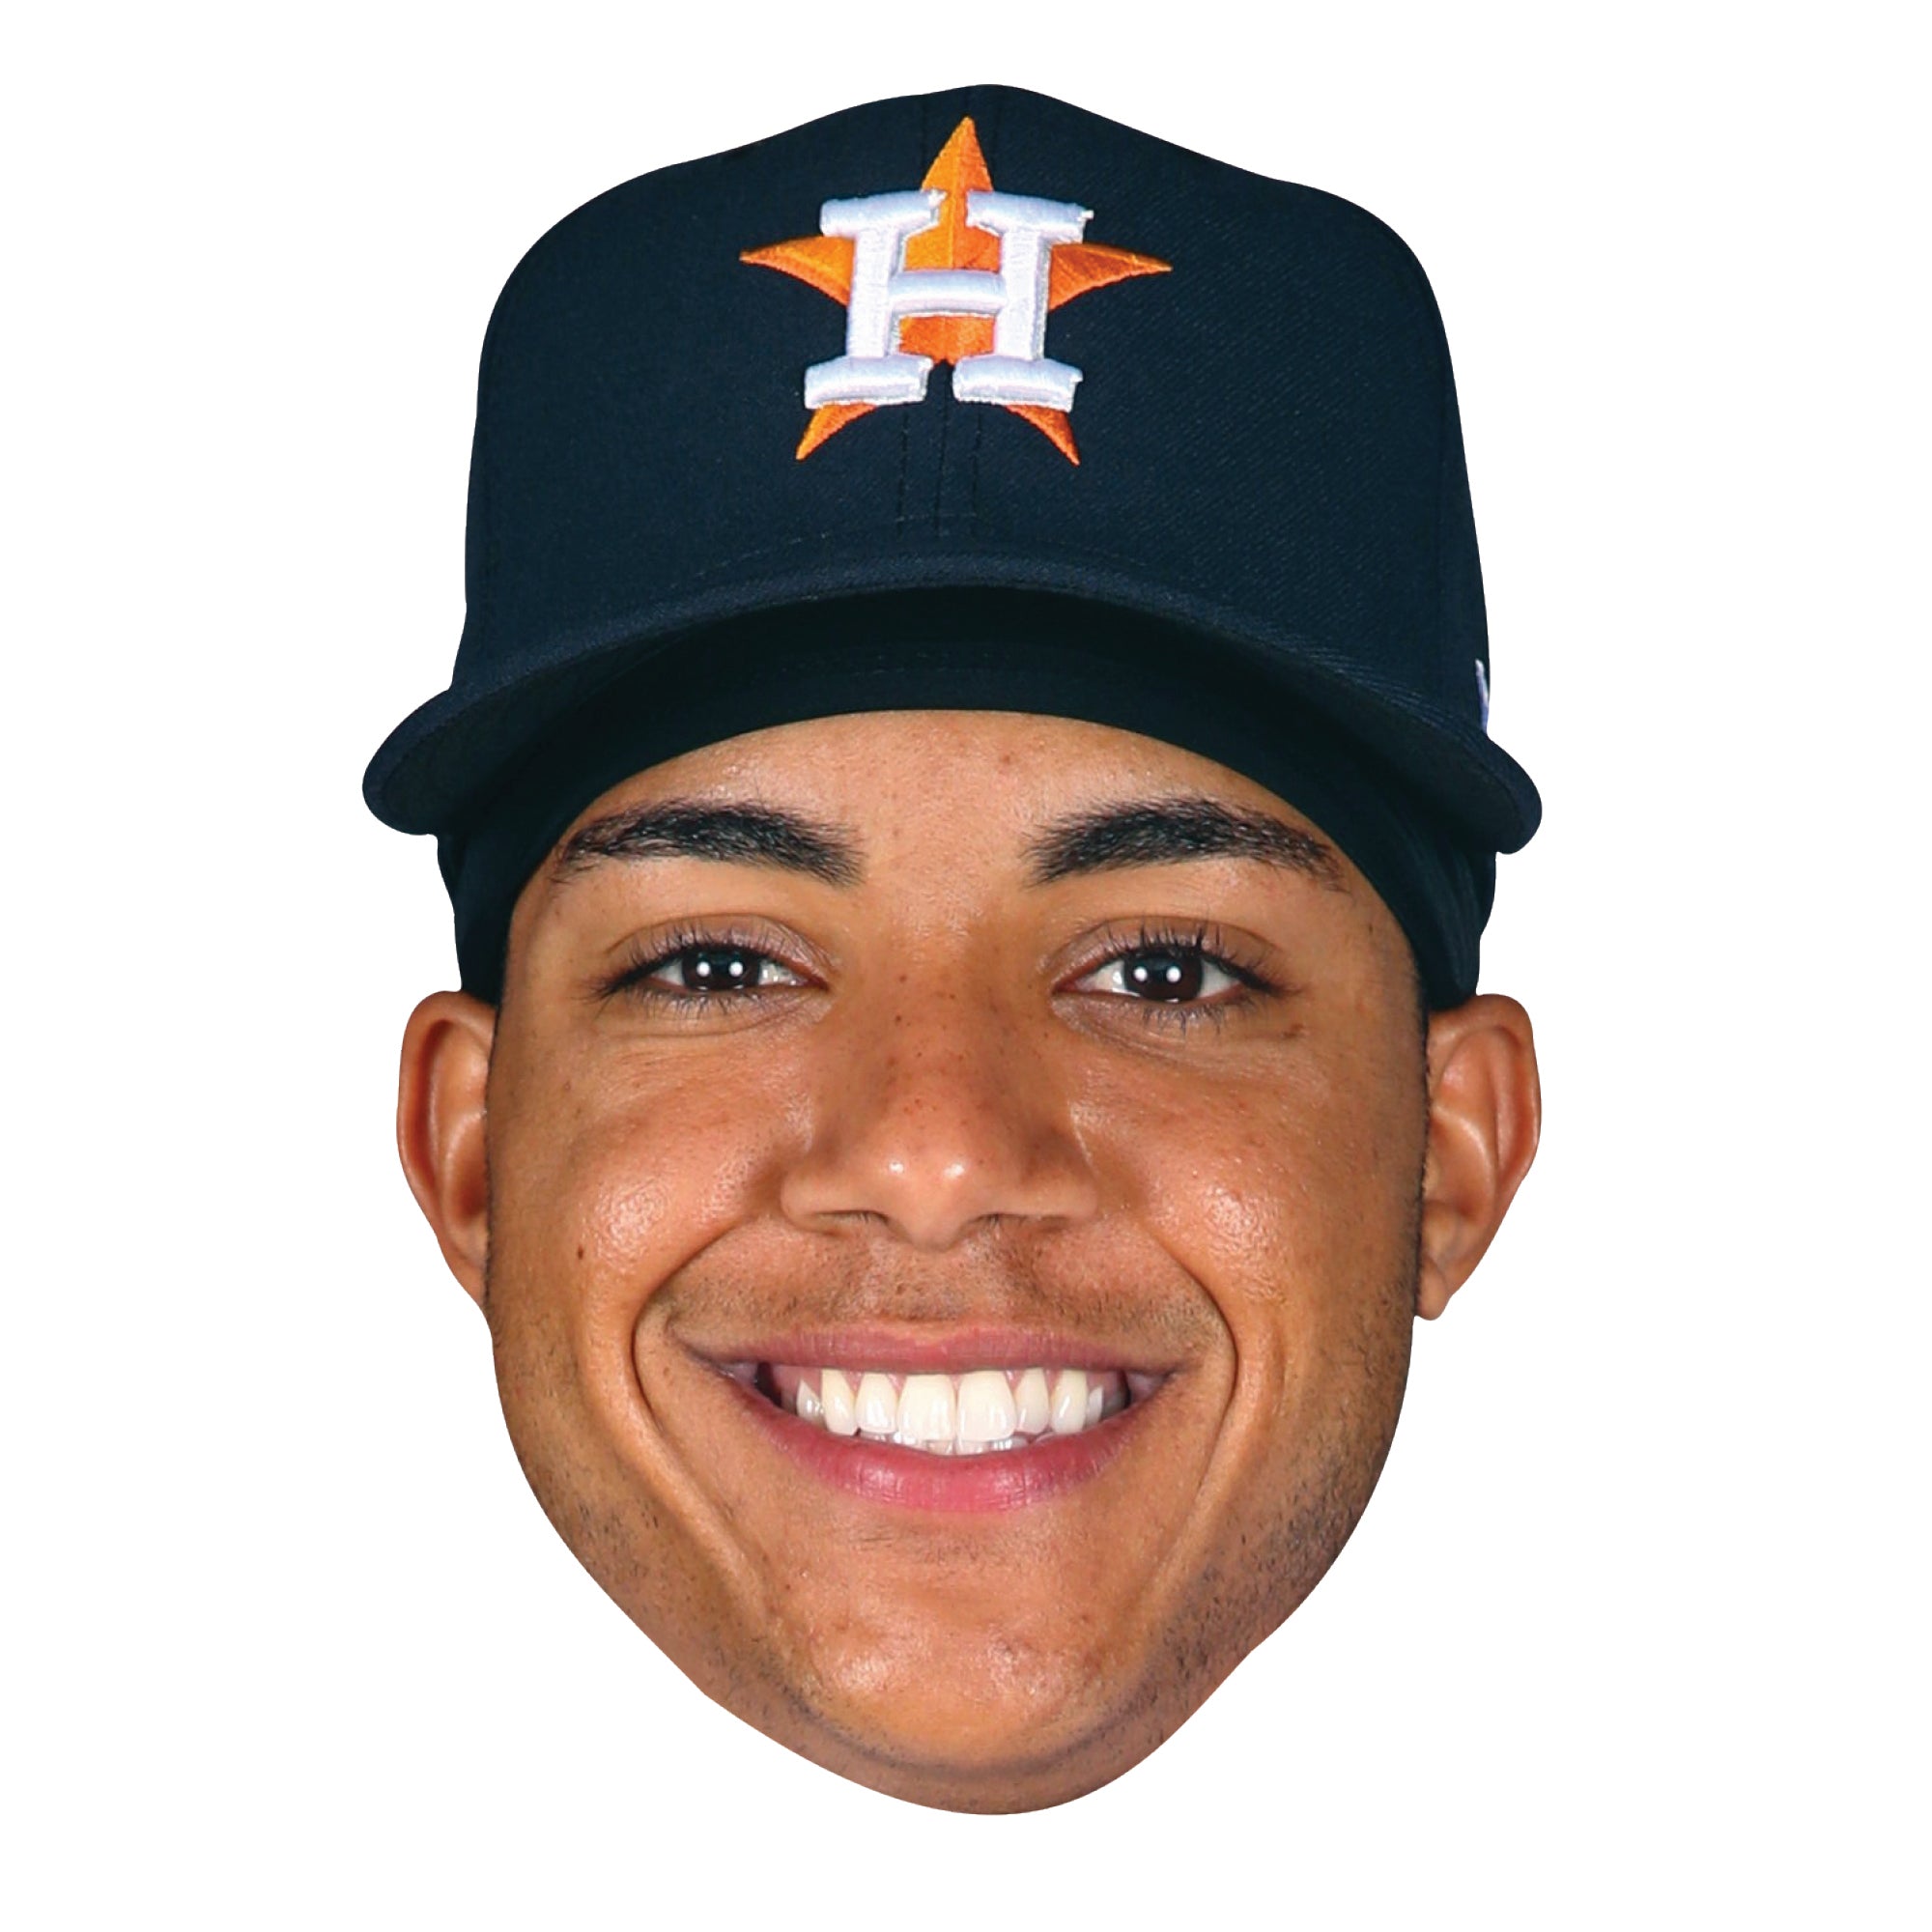 Jeremy Pena Houston Astros Canvas Wall Art Perfect Decor for